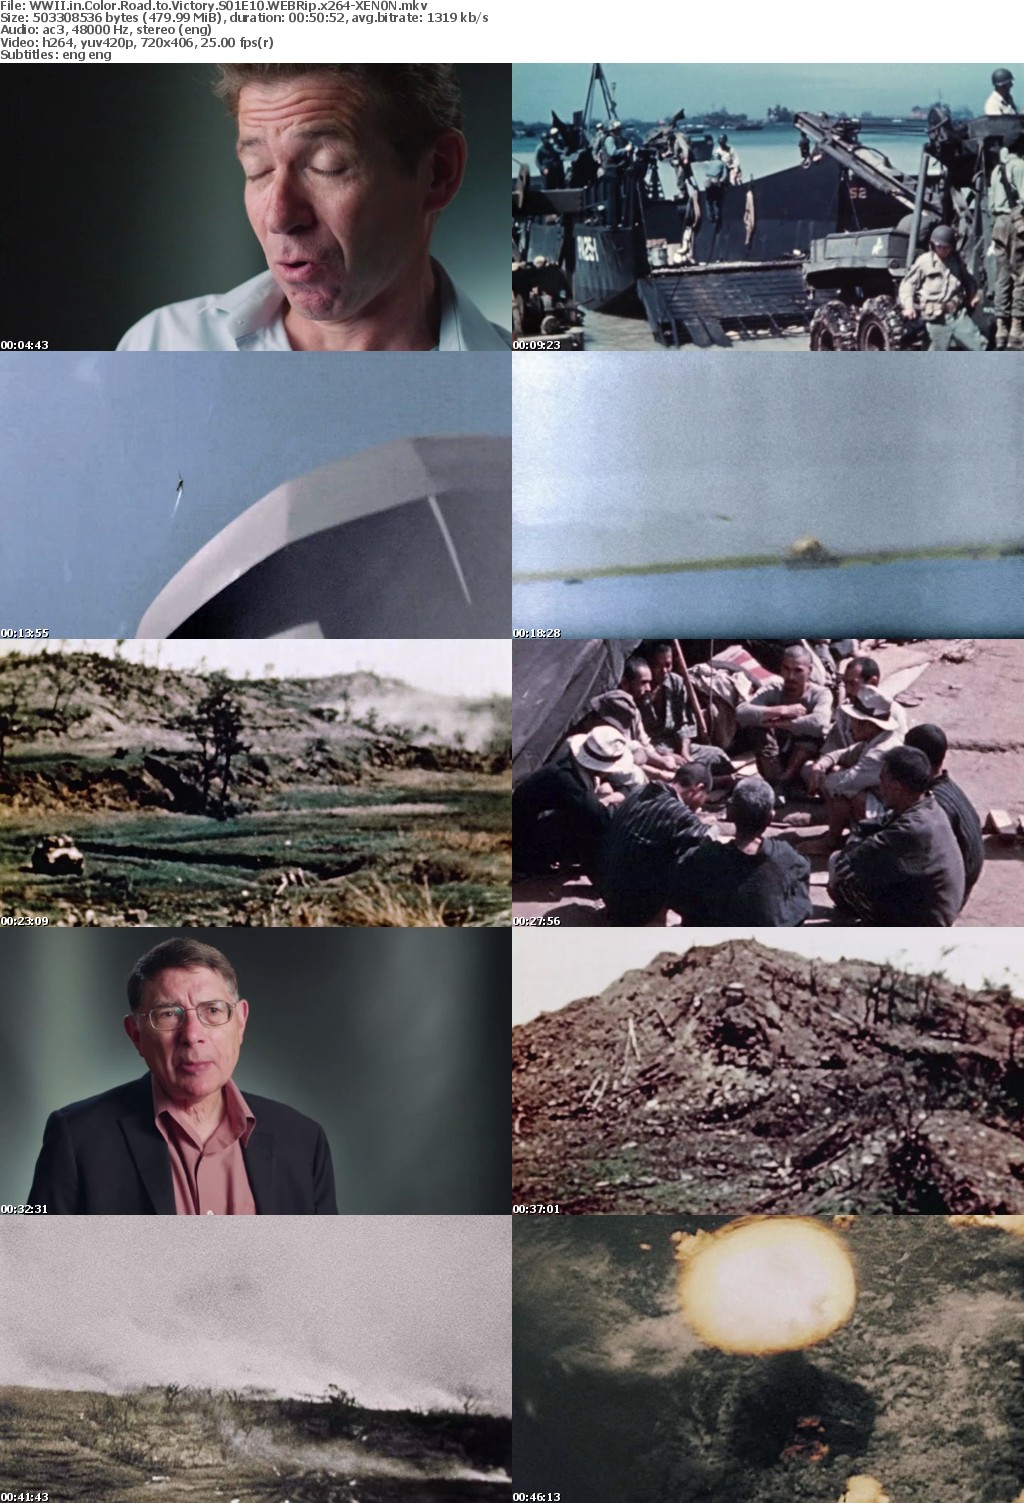 WWII in Color Road to Victory S01E10 WEBRip x264-XEN0N